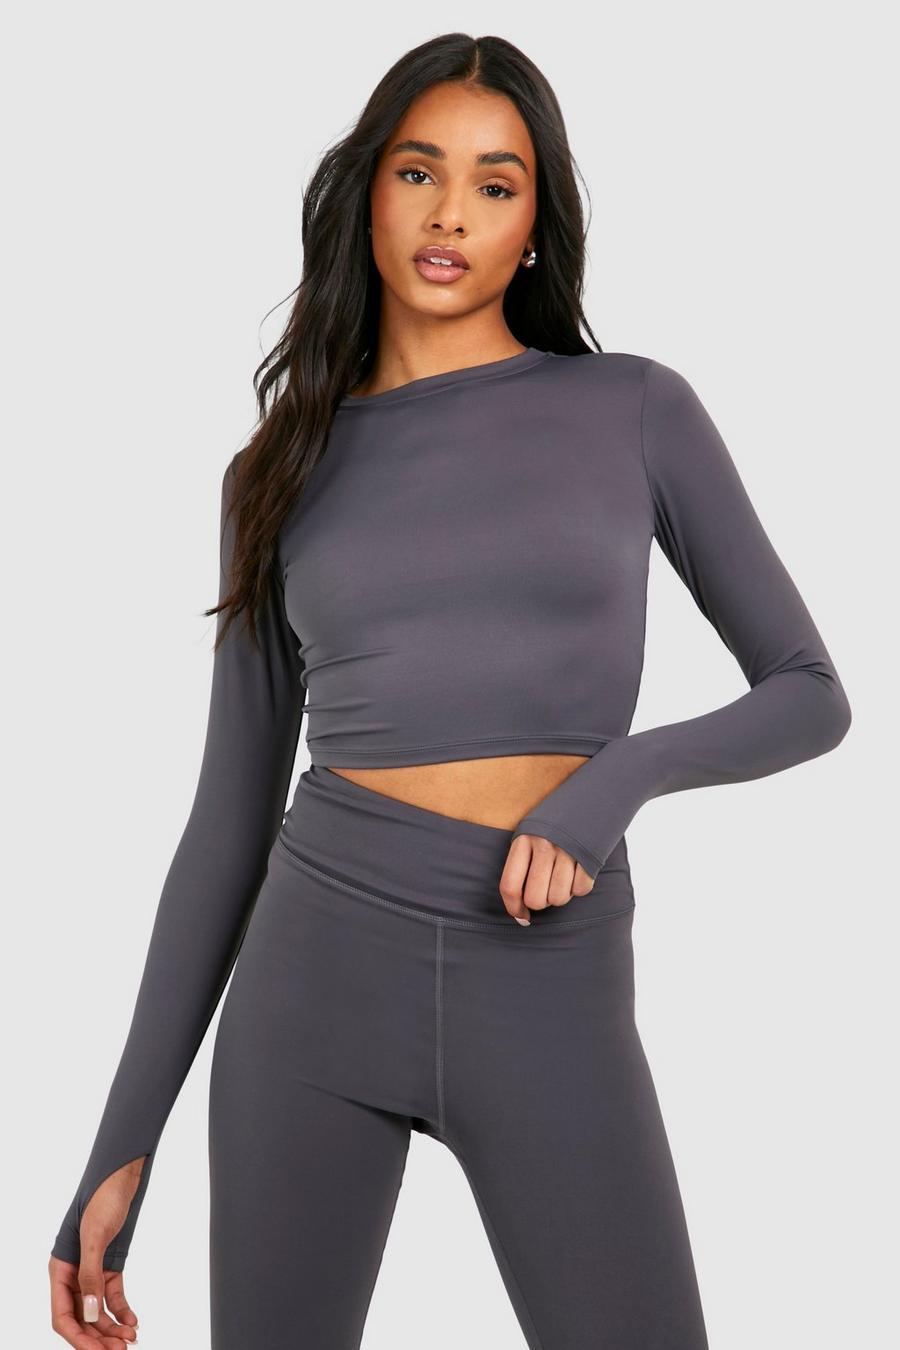 Charcoal Tall Supersoft Peached Sculpt Long Sleeve Top